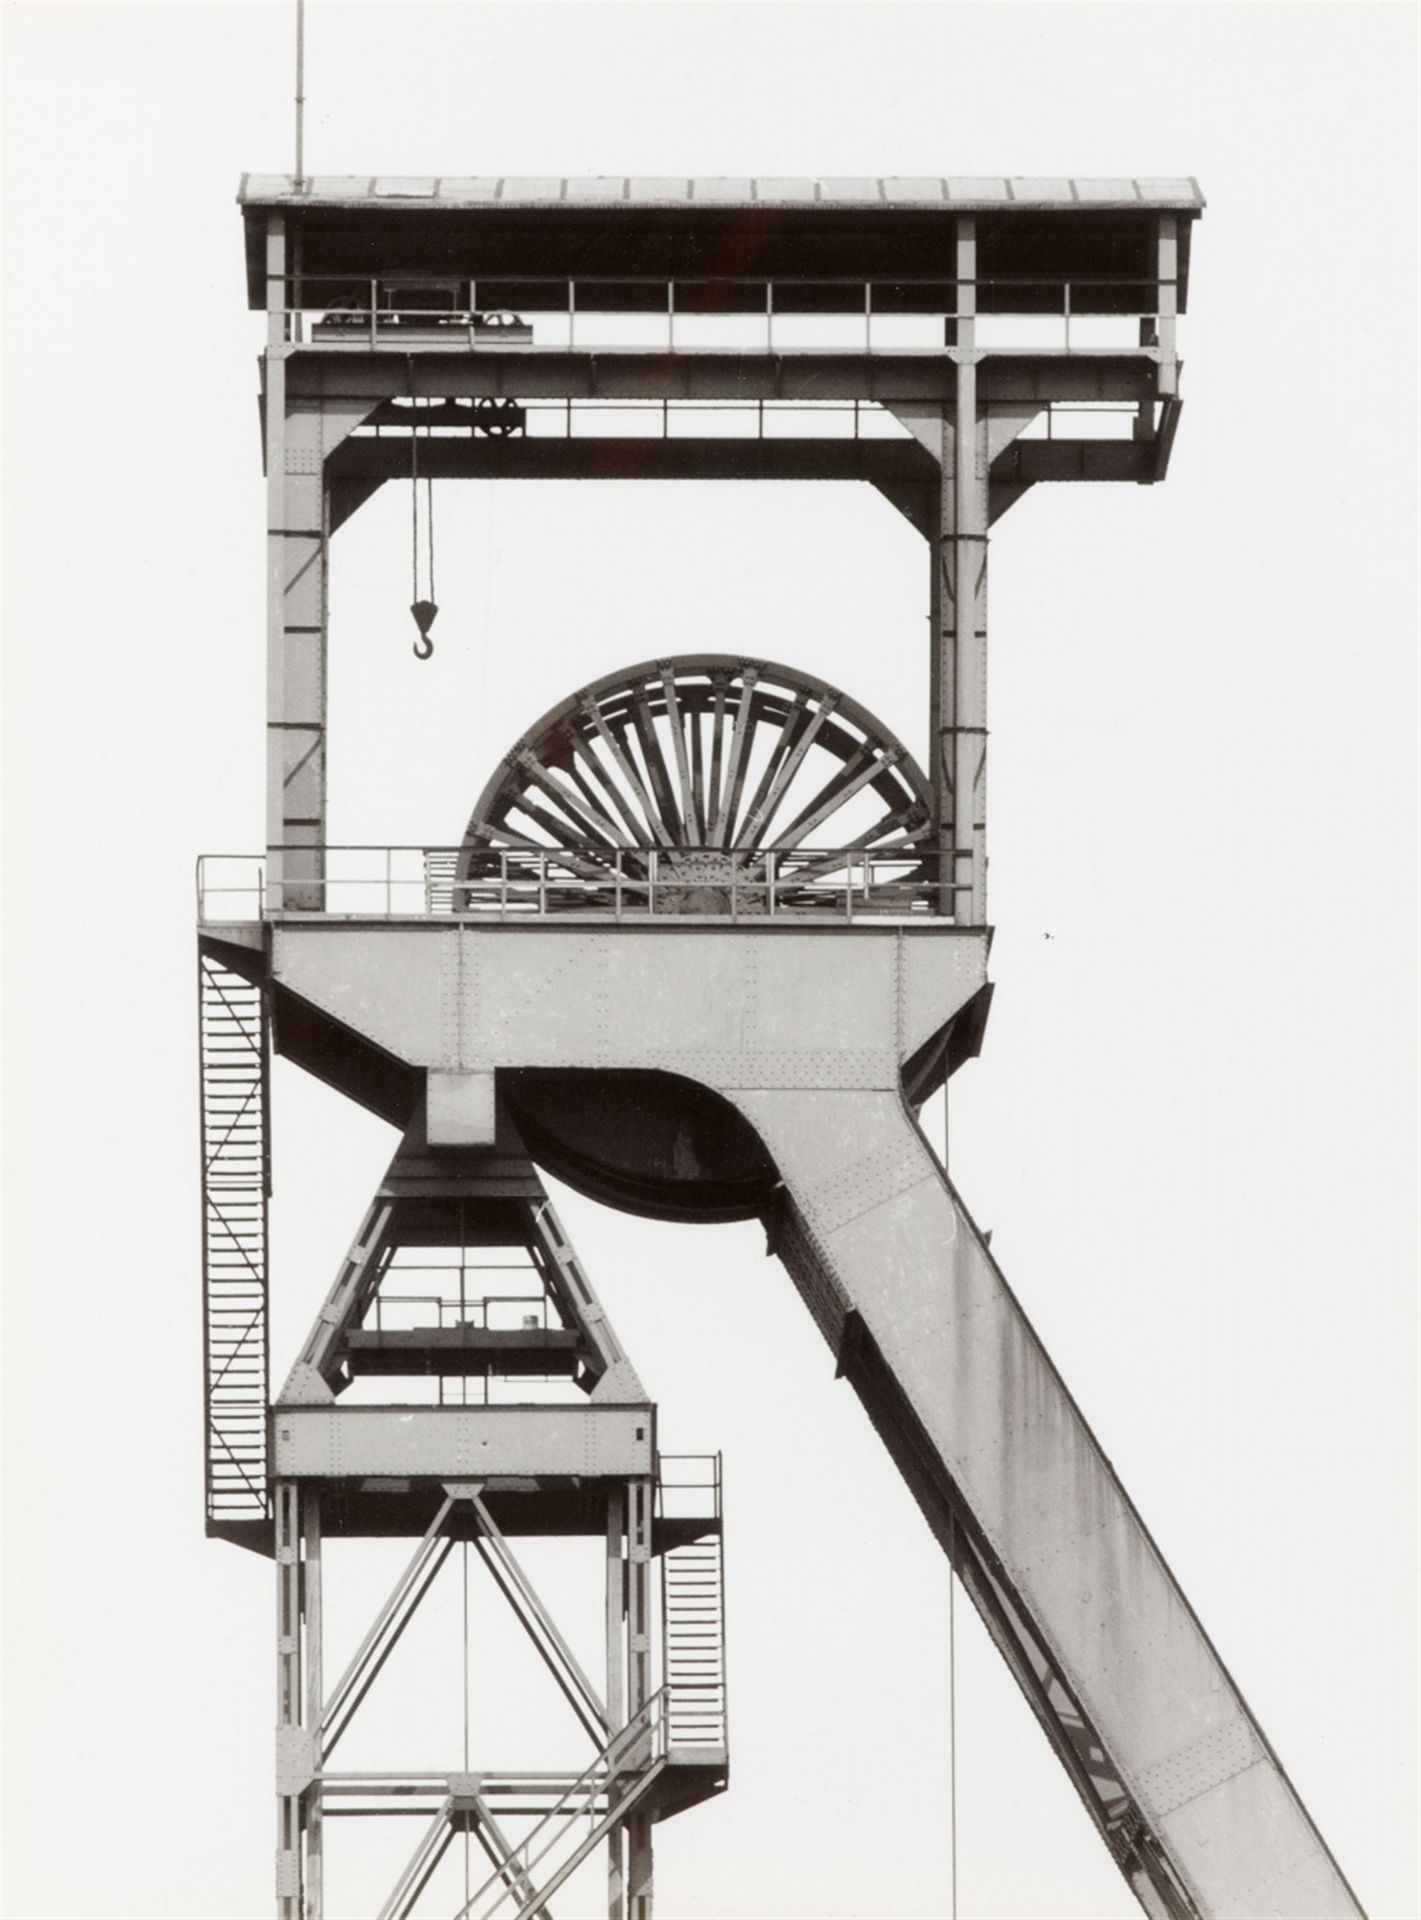 Bernd and Hilla Becher, Winding towers - Image 3 of 14